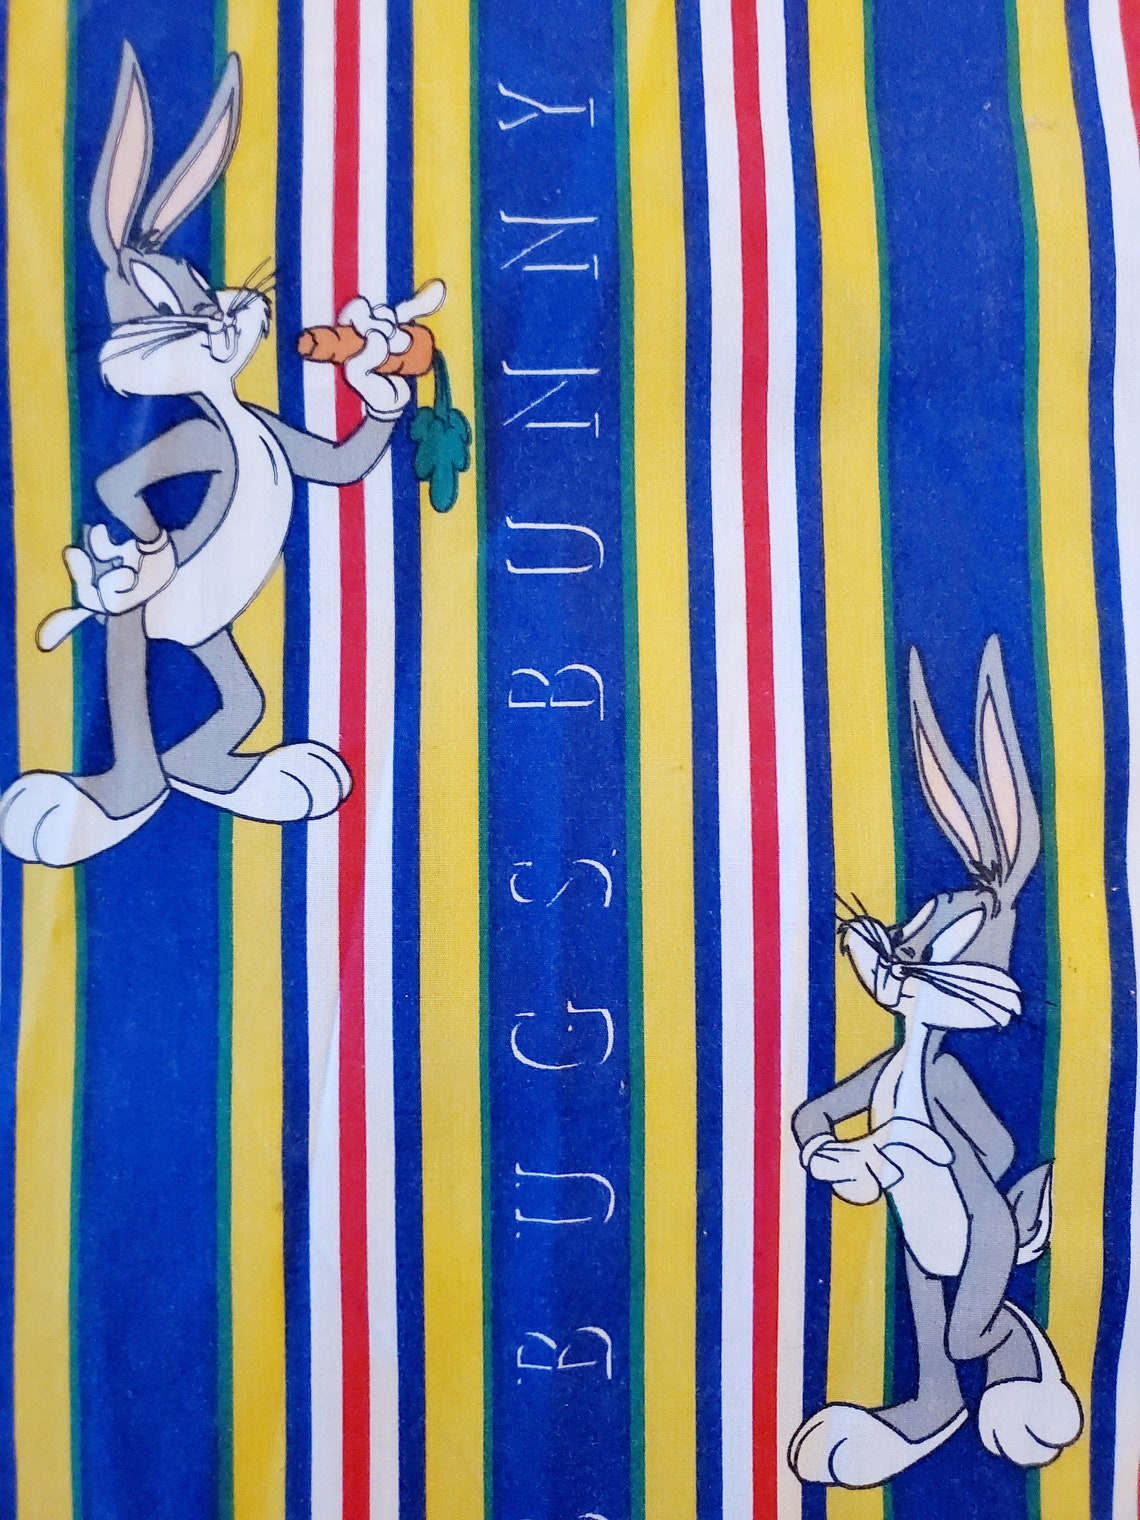 Vintage Bugs Bunny Bed Sheet | Etsy